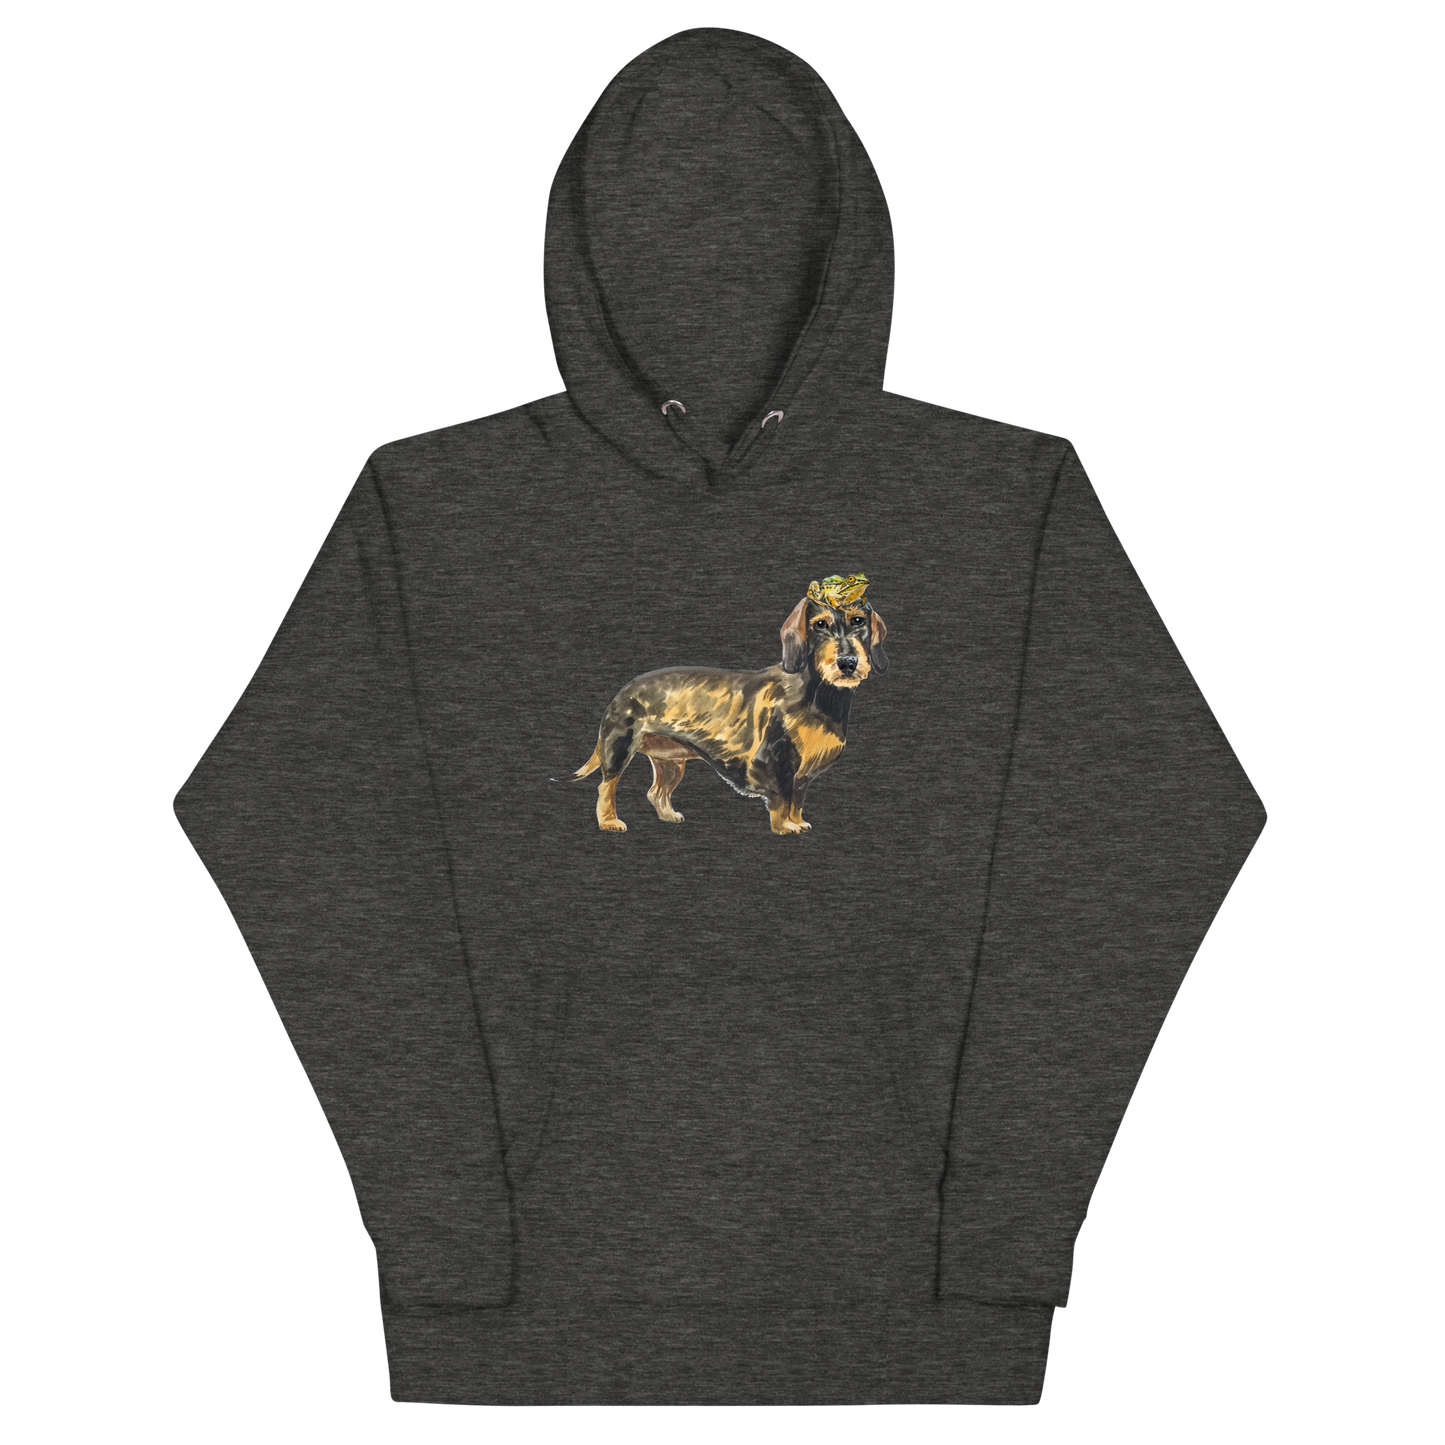 Charcoal Heather Premium Dachshund Hoodie featuring an adorable Frog on a Dachshund's Head graphic on the chest - Cute Graphic Dachshund Hoodies - Boozy Fox